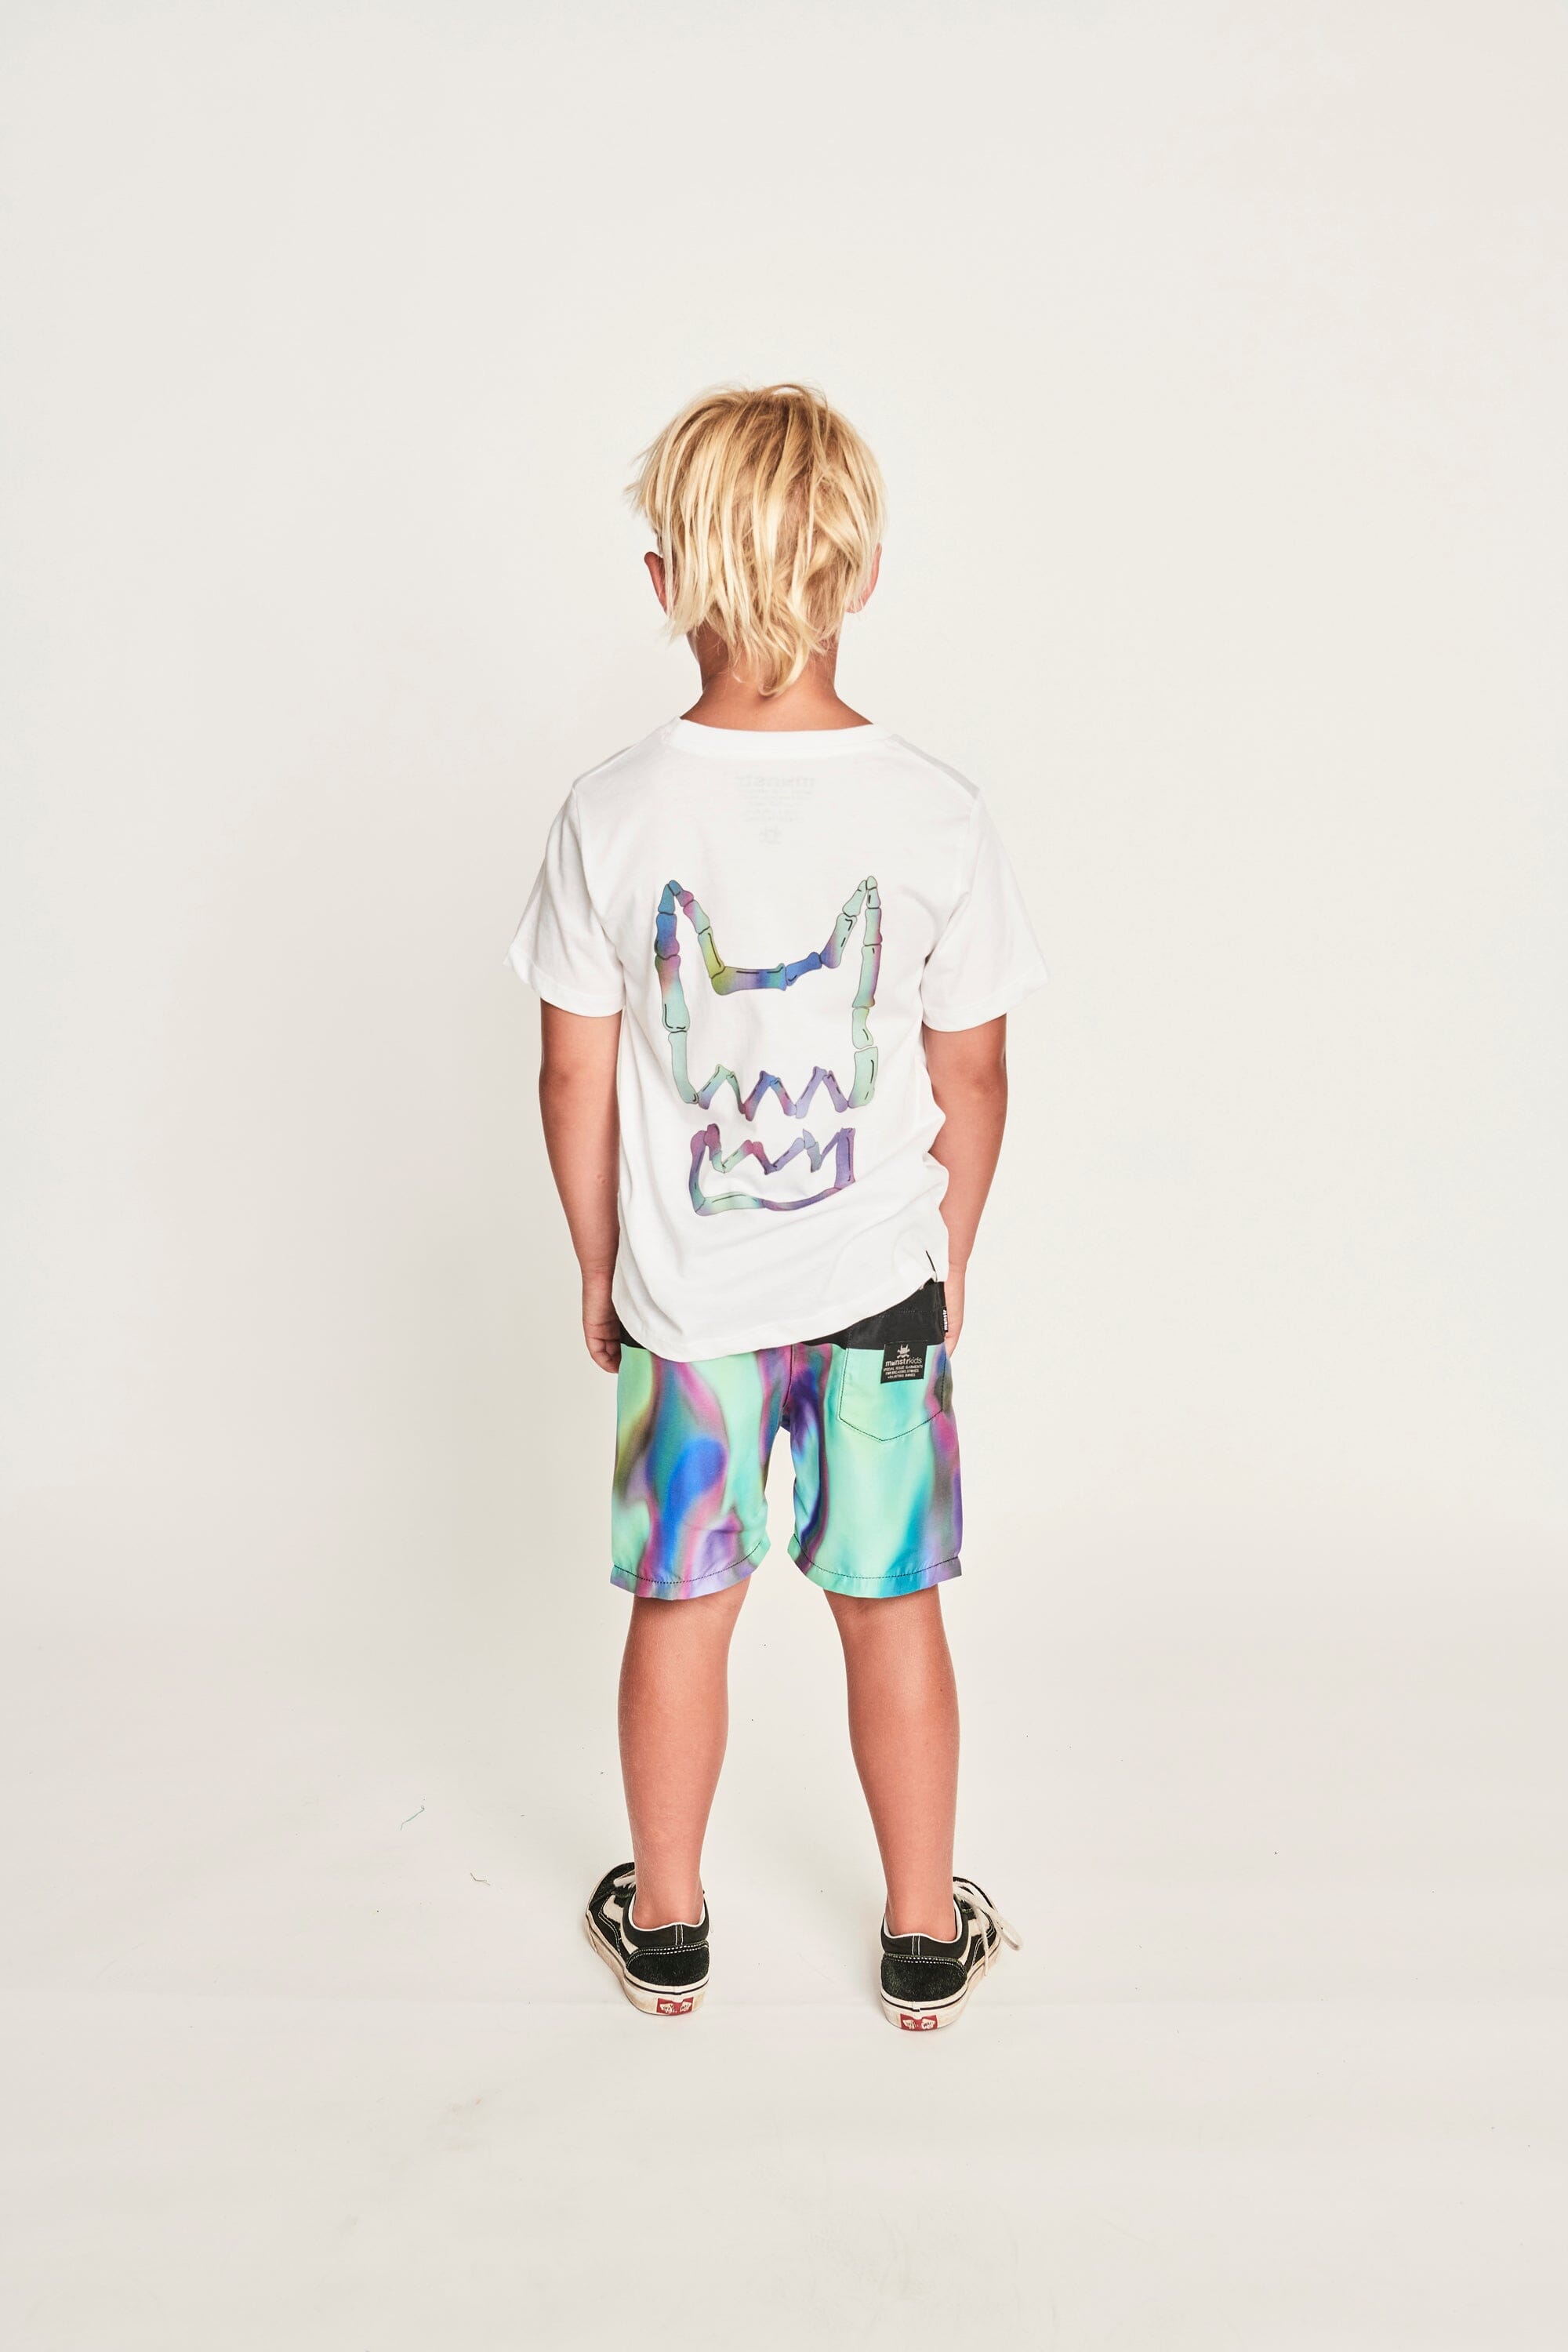 Munster - GLOWTEETH SS TEE - White ** PRE ORDER / DUE MID-LATE SEP ** Boys Munster Kids